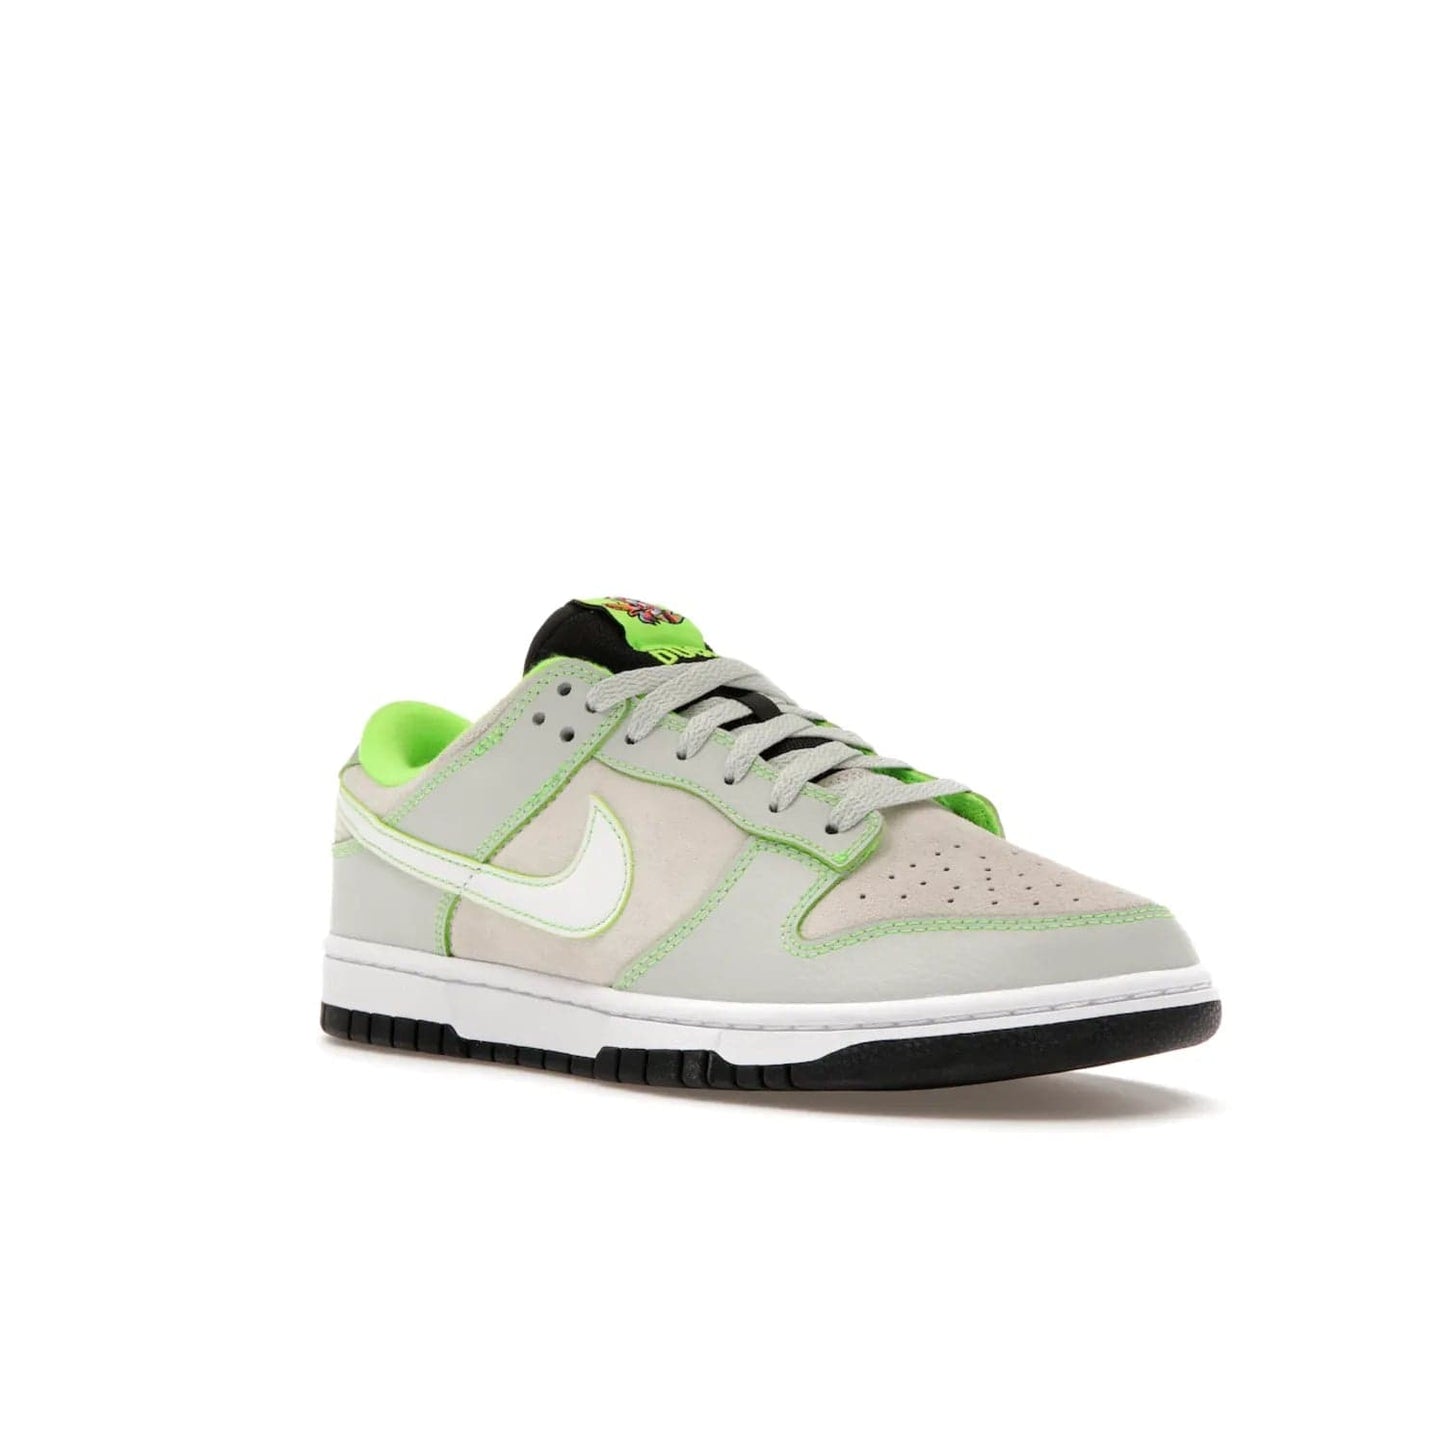 Nike Dunk Low University of Oregon PE (2023) - Image 5 - Only at www.BallersClubKickz.com - Sleek Light Silver and White upper, complemented by Black and Electric Green accents. Nike Dunk Low University of Oregon PE, set to be released April 2023. Must-have for any serious fan.